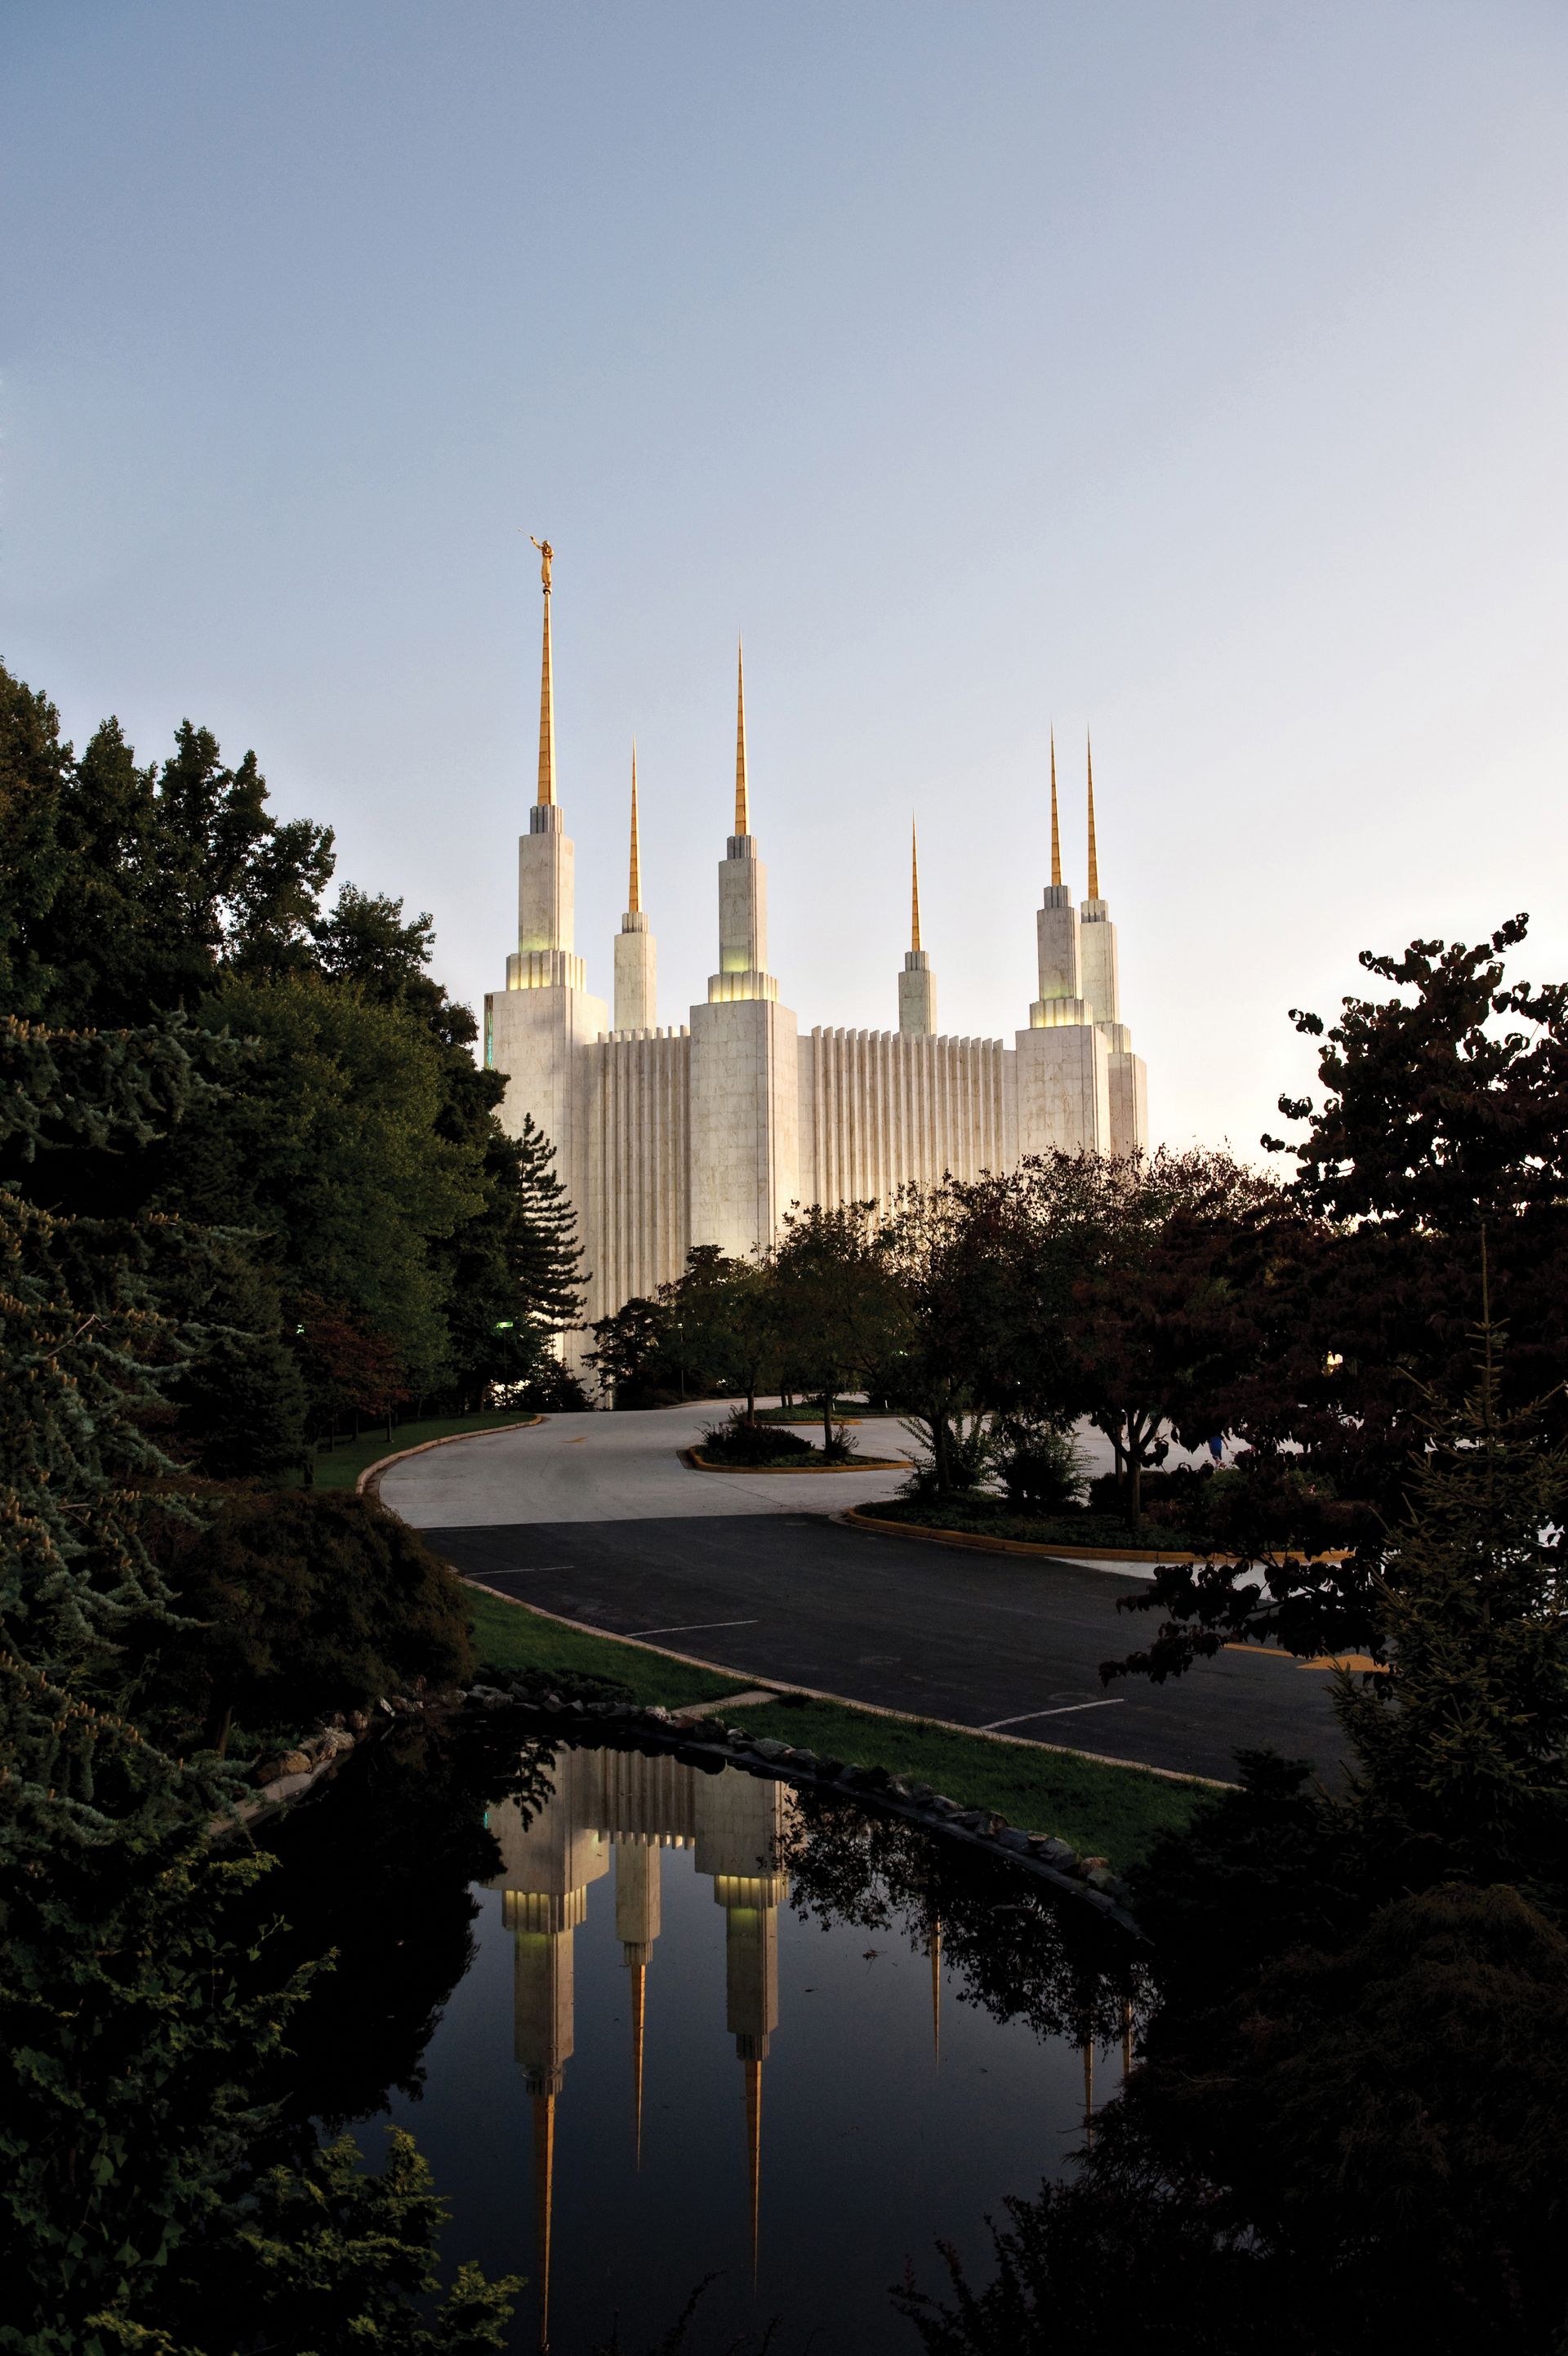 The Washington D.C. Temple during sunset, with the road and pond.